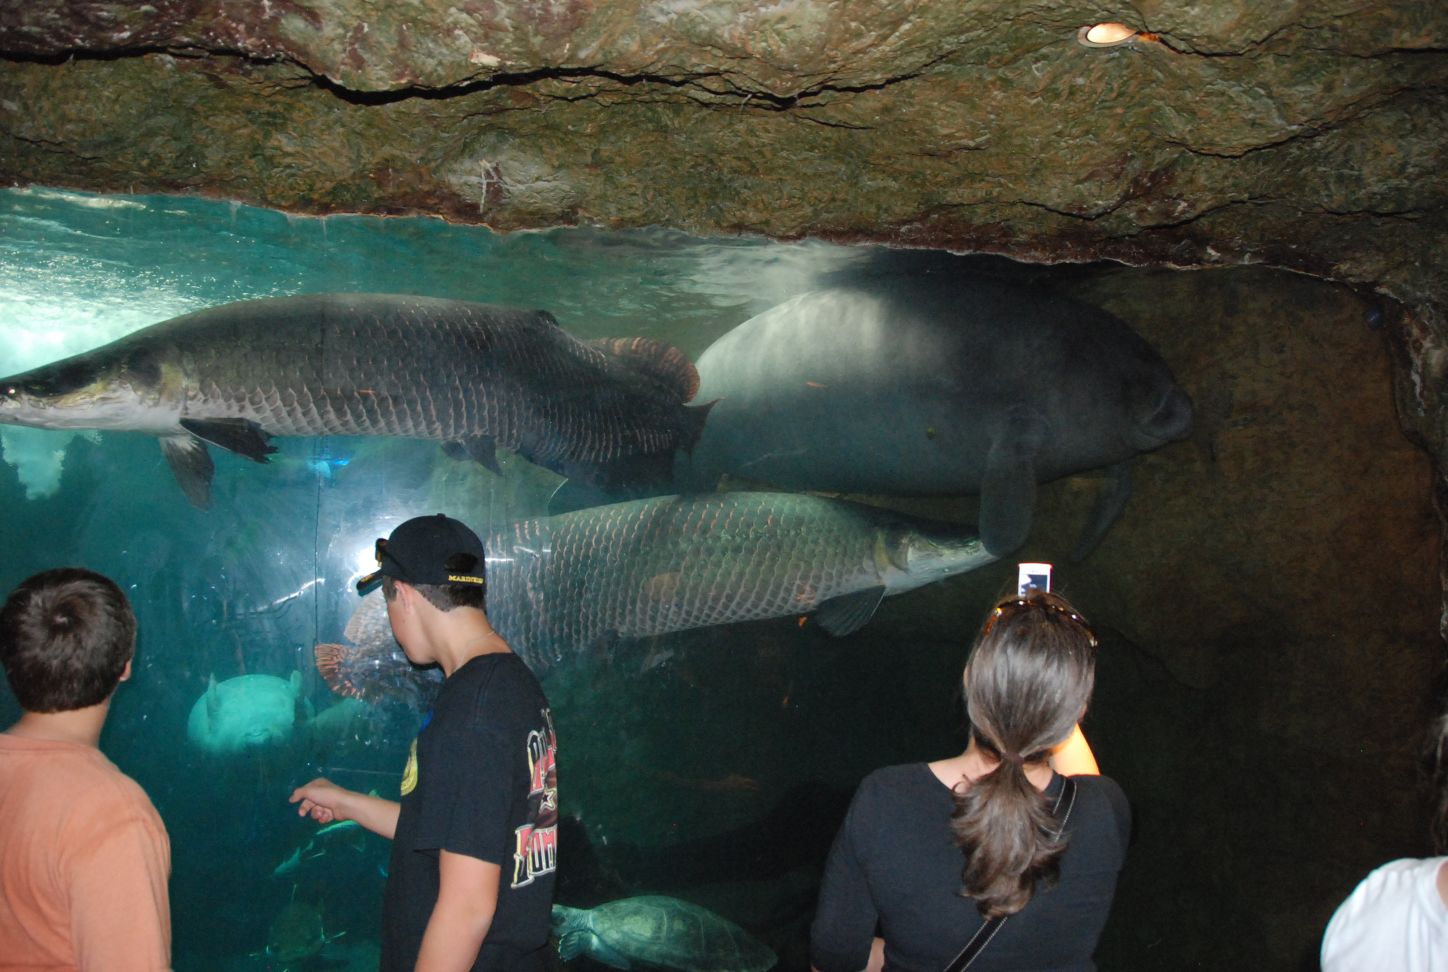 New species of giant  fish discovered in Brazil